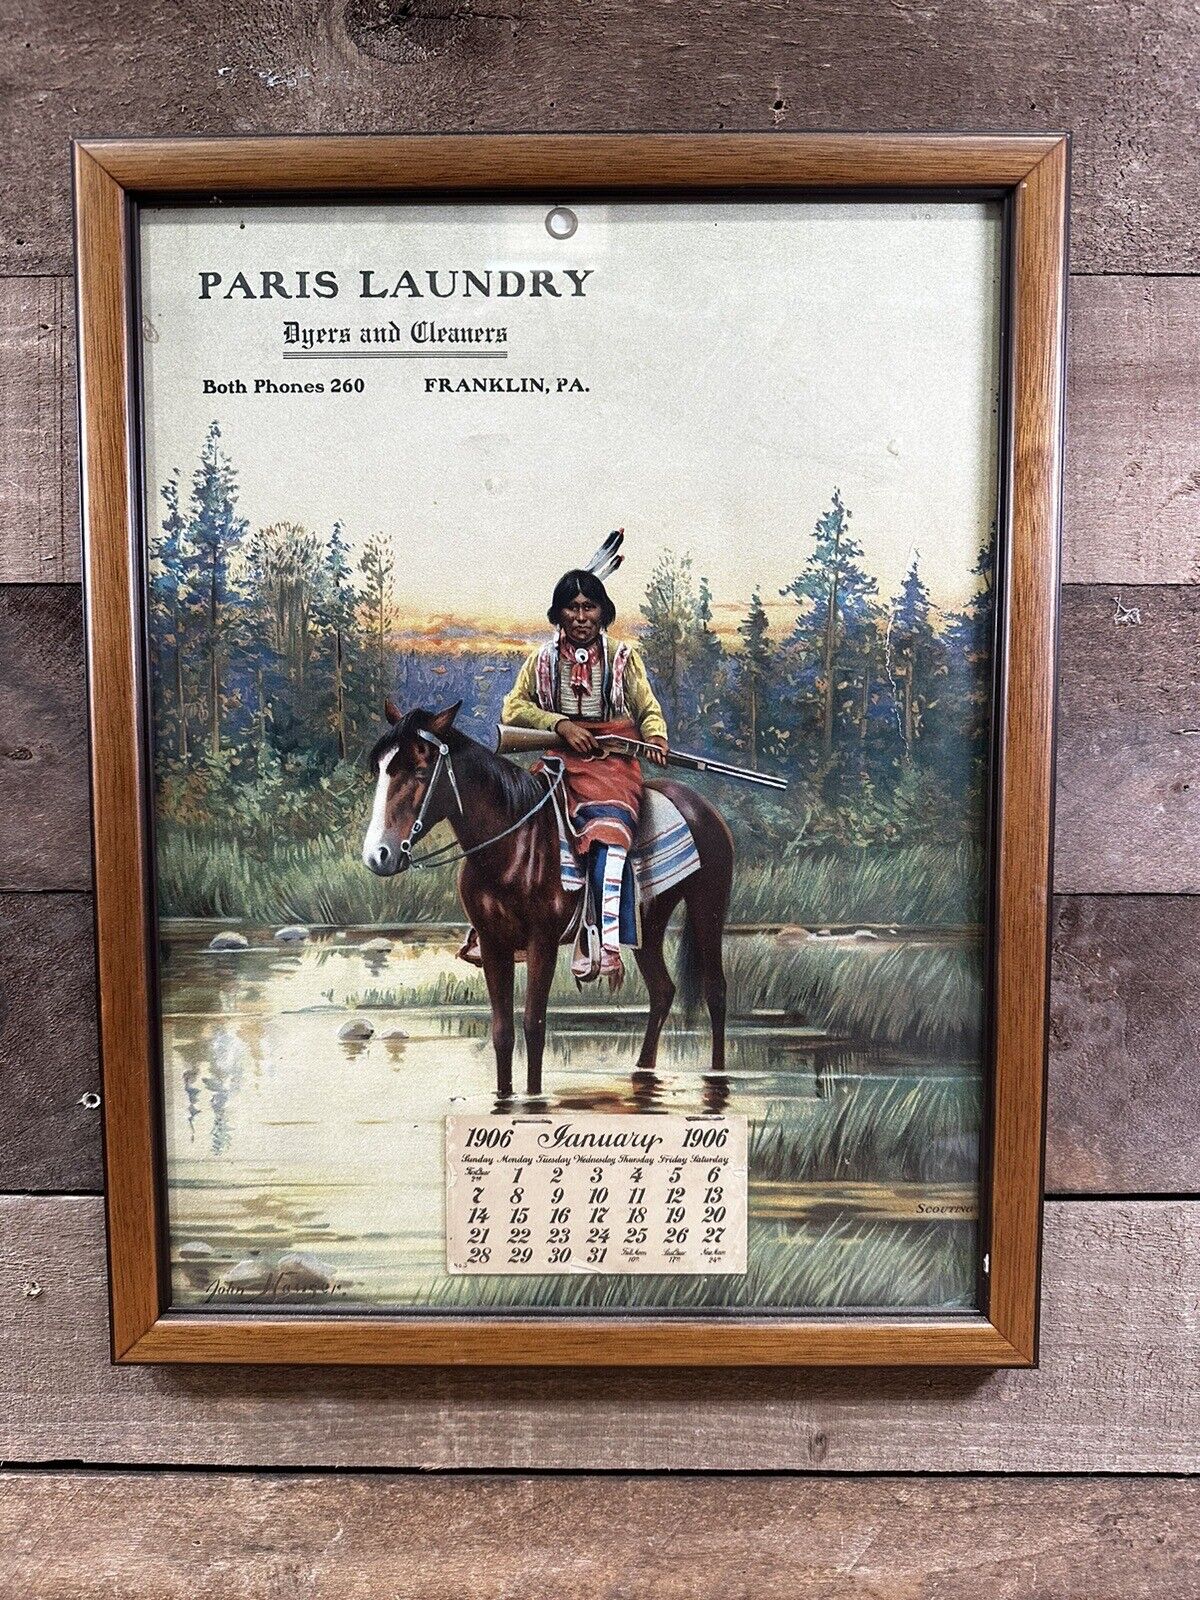 Antique Framed 1906 “Paris Laundry” Dyers And Cleaners Franklin PA. Calendar 